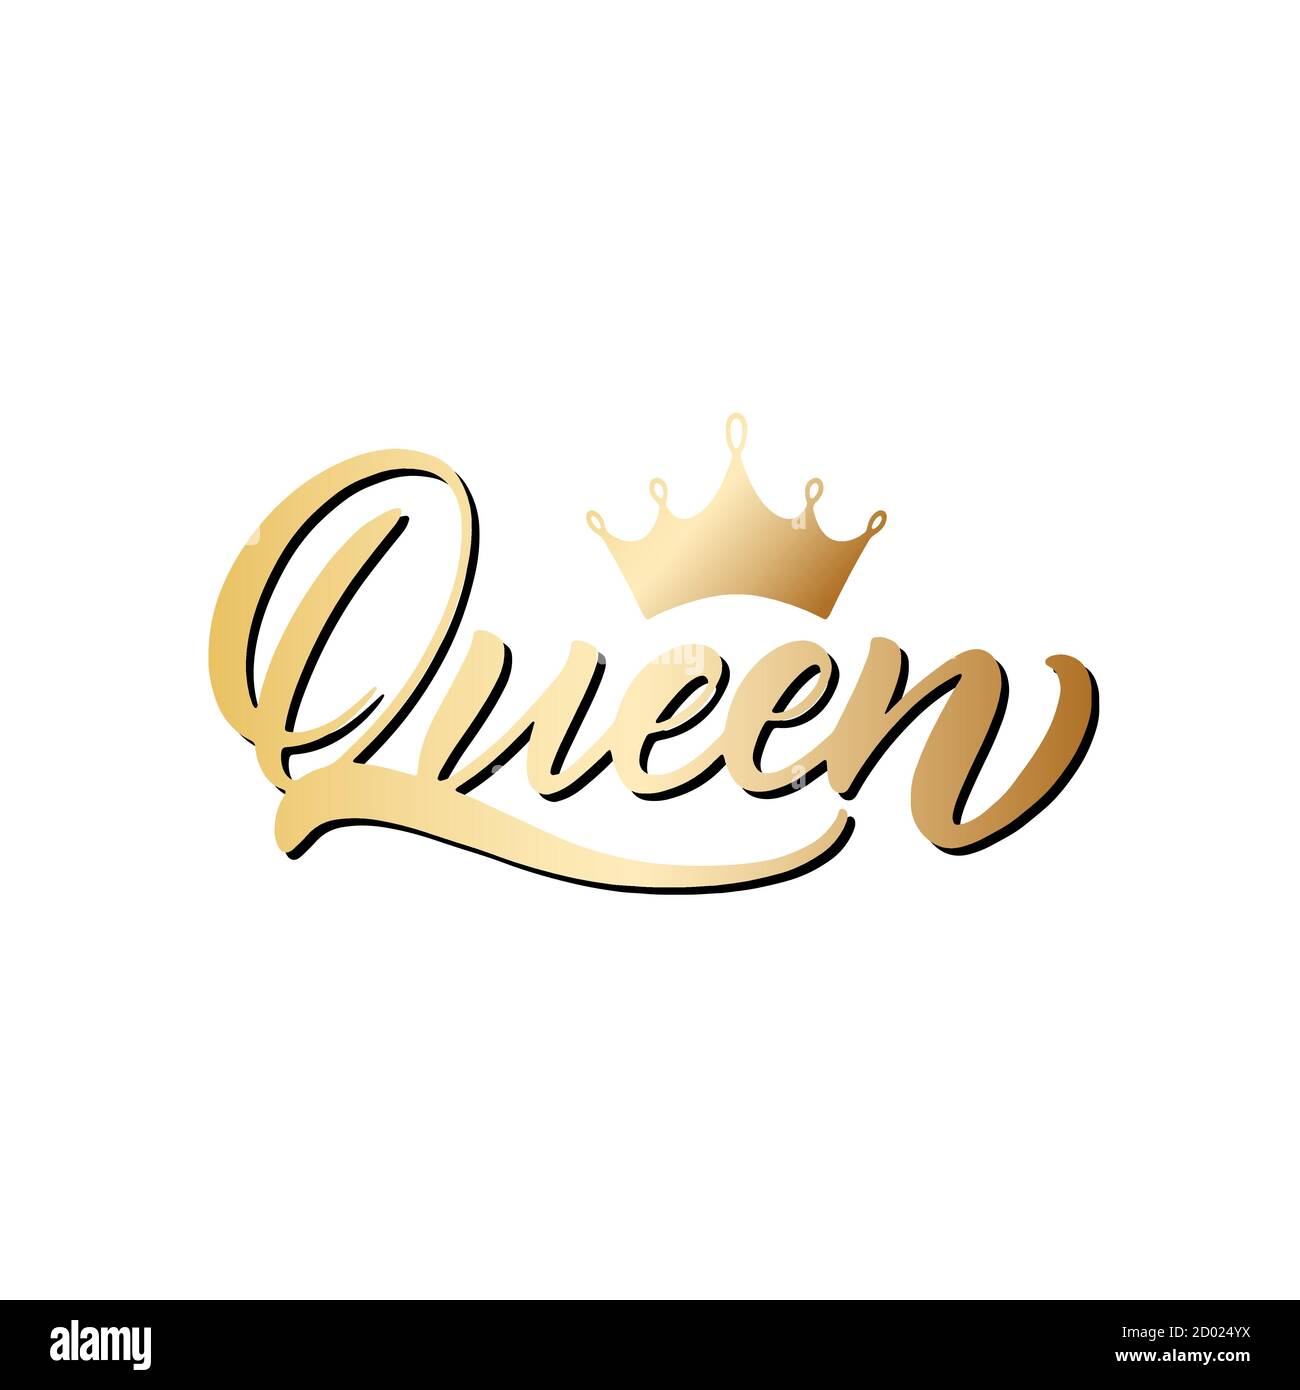 Image Alamy Stock image gold Art Trendy Queen with Vector - for print lettering & crown